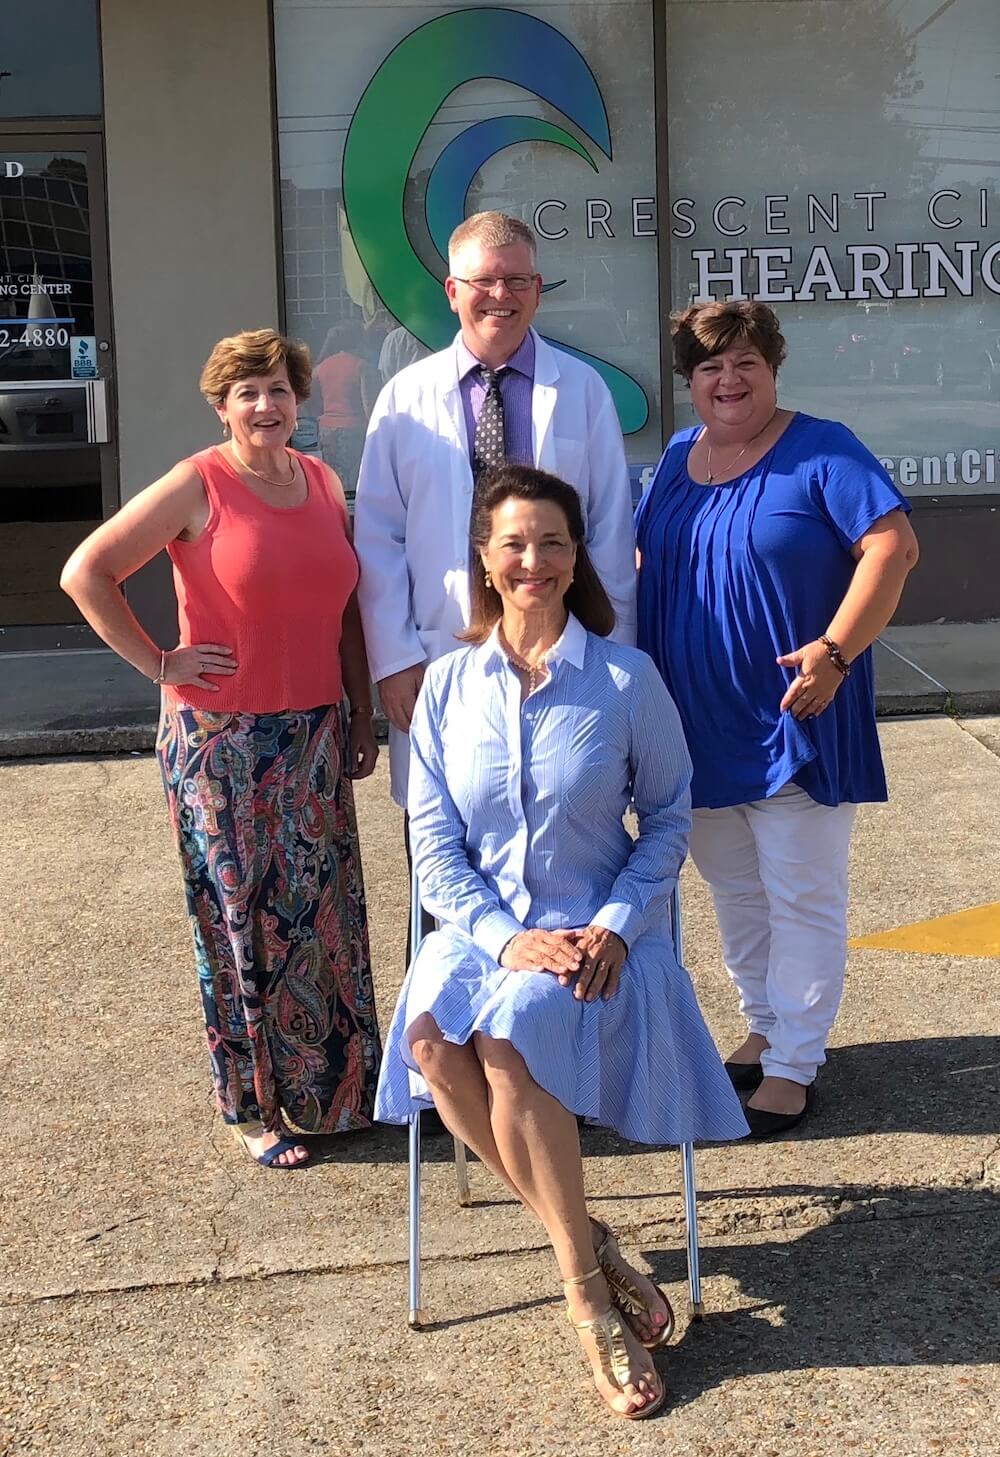 Announcement for Crescent City Hearing Center - Metairie